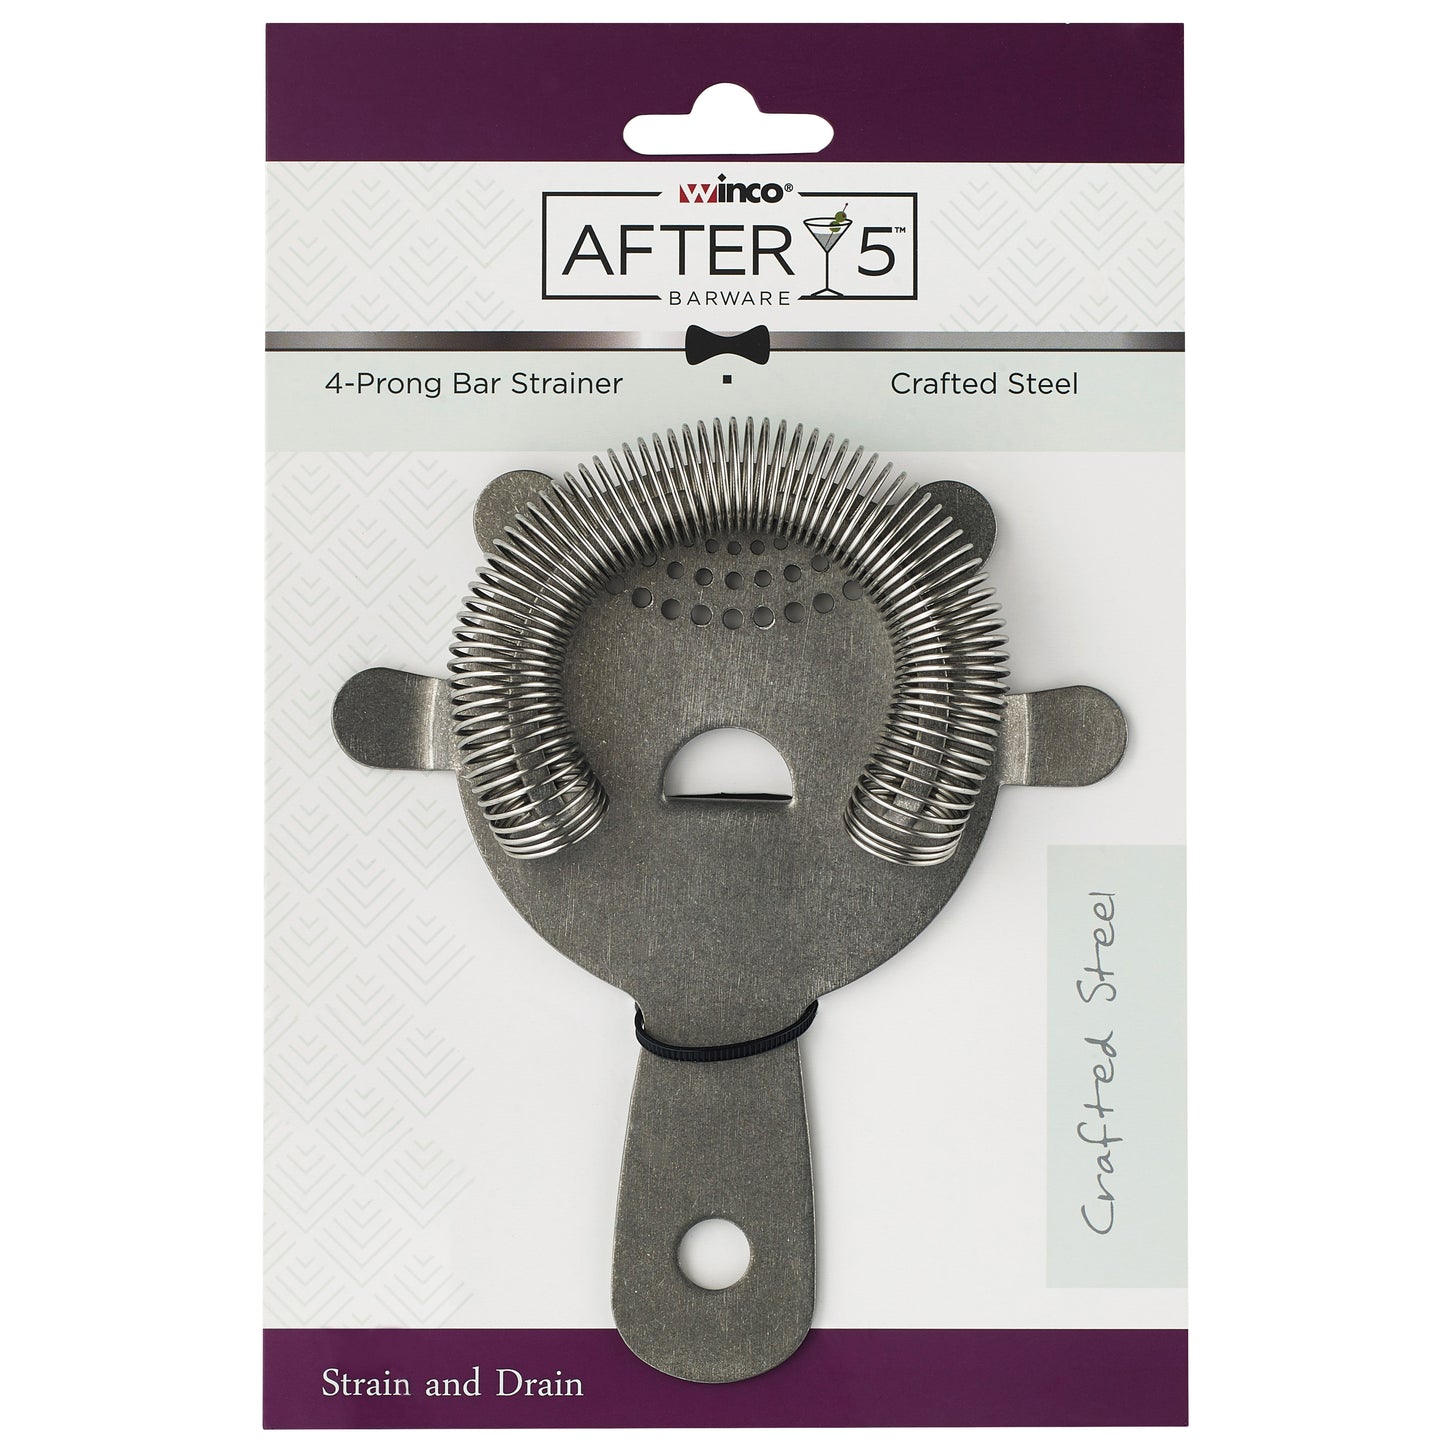 BABS-6CS - After5 Hawthorne Strainer, Crafted Steel